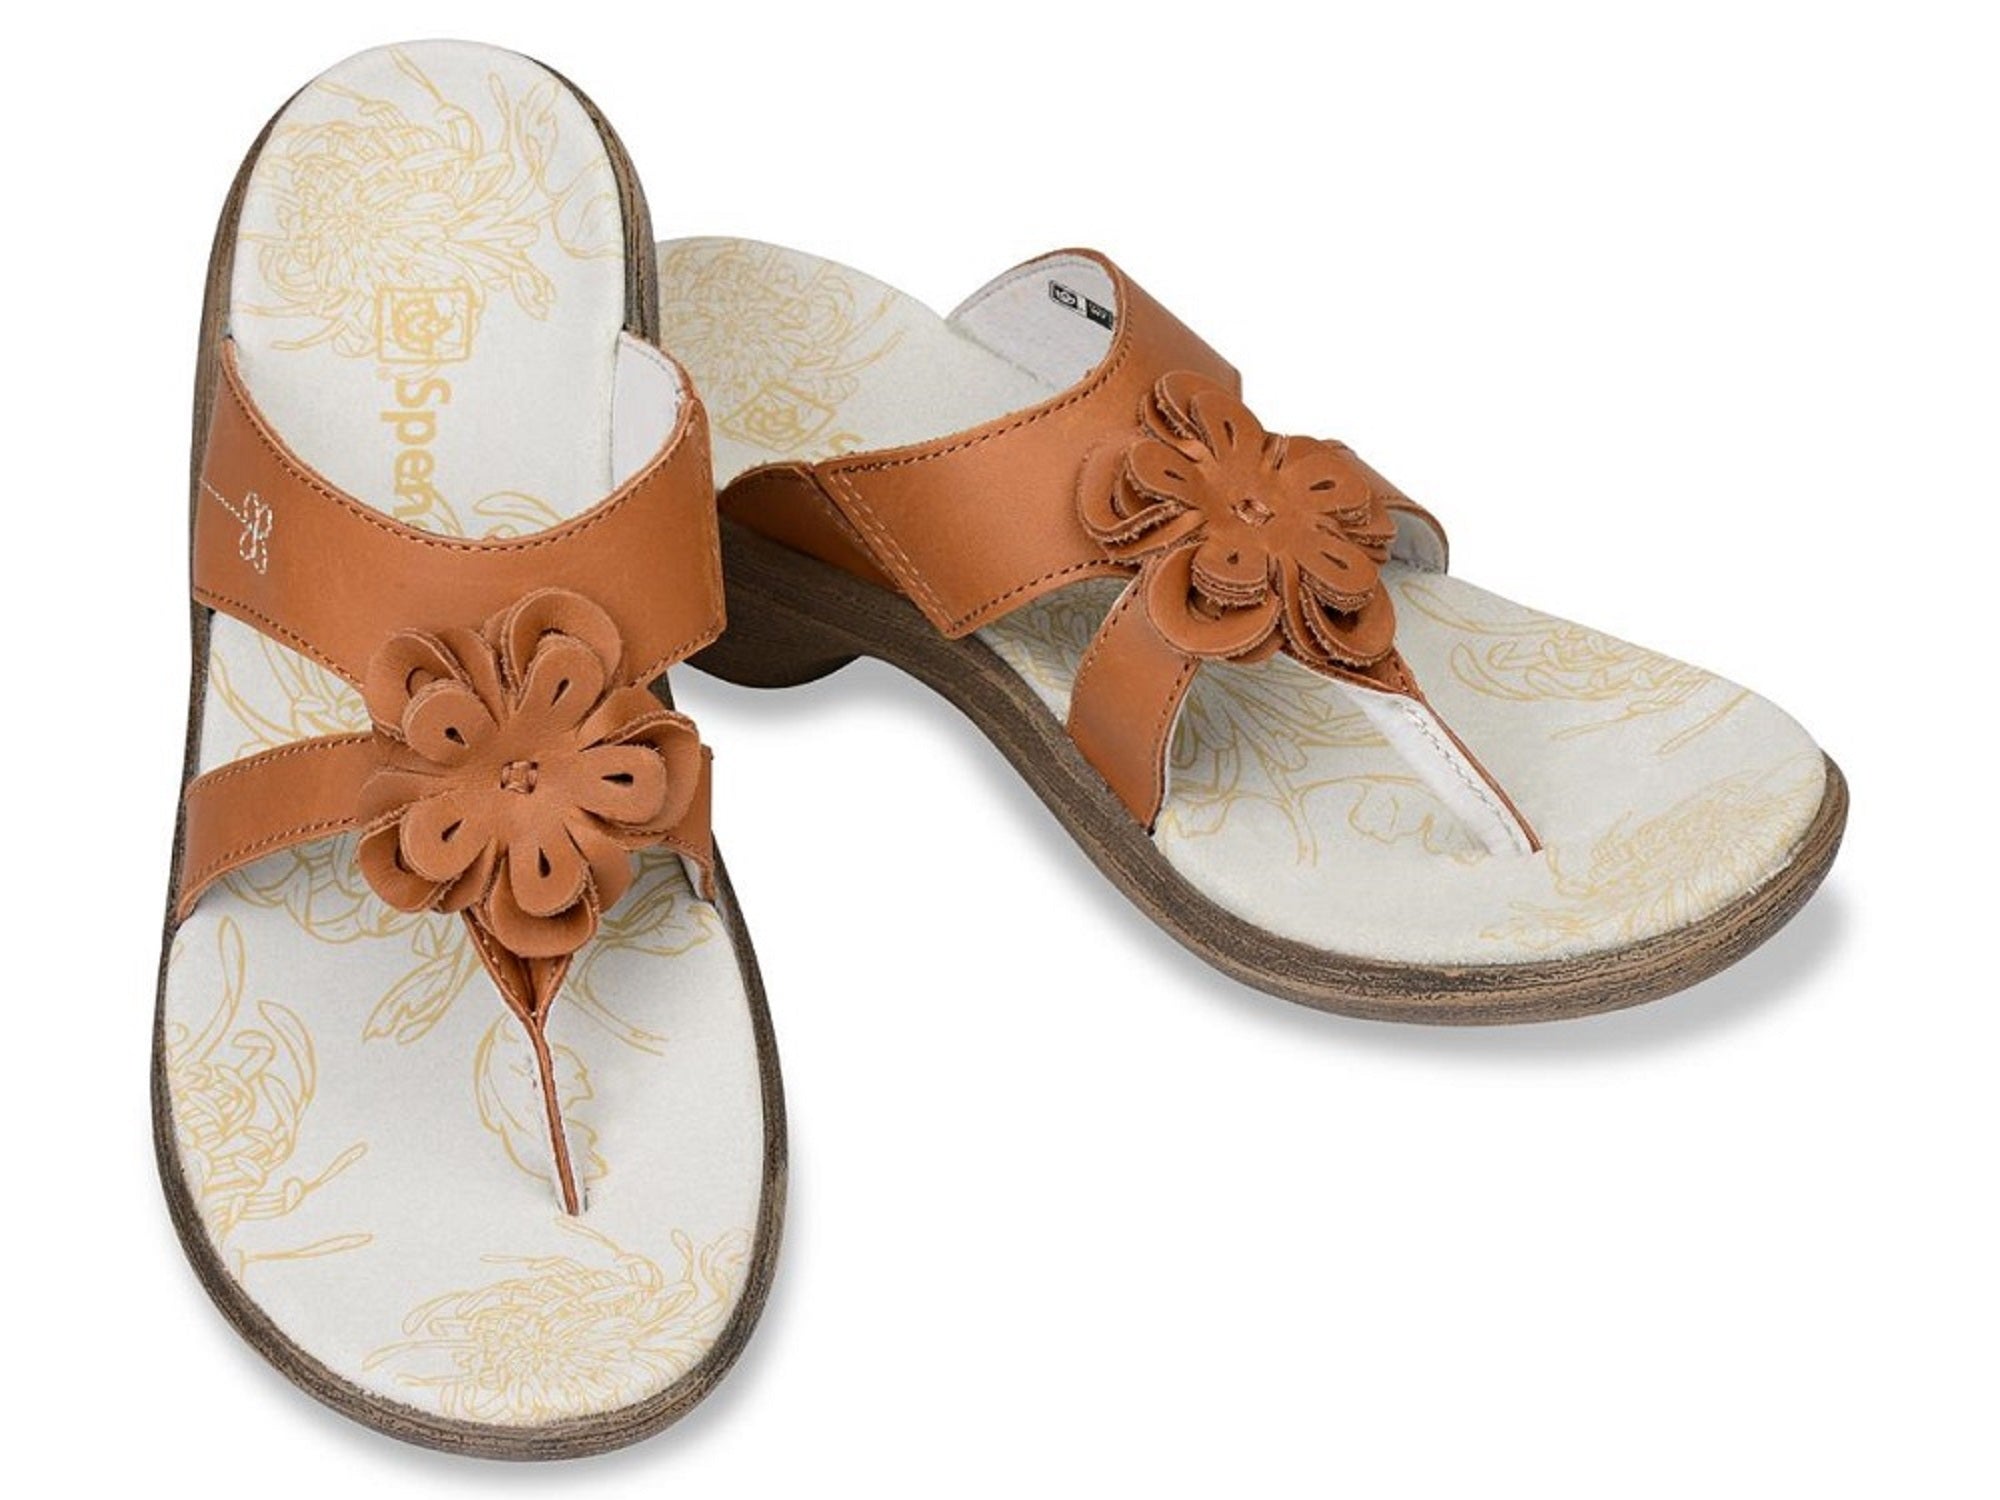 Spenco Rose - Supportive Casual Sandals - Tan Women's - Size 7